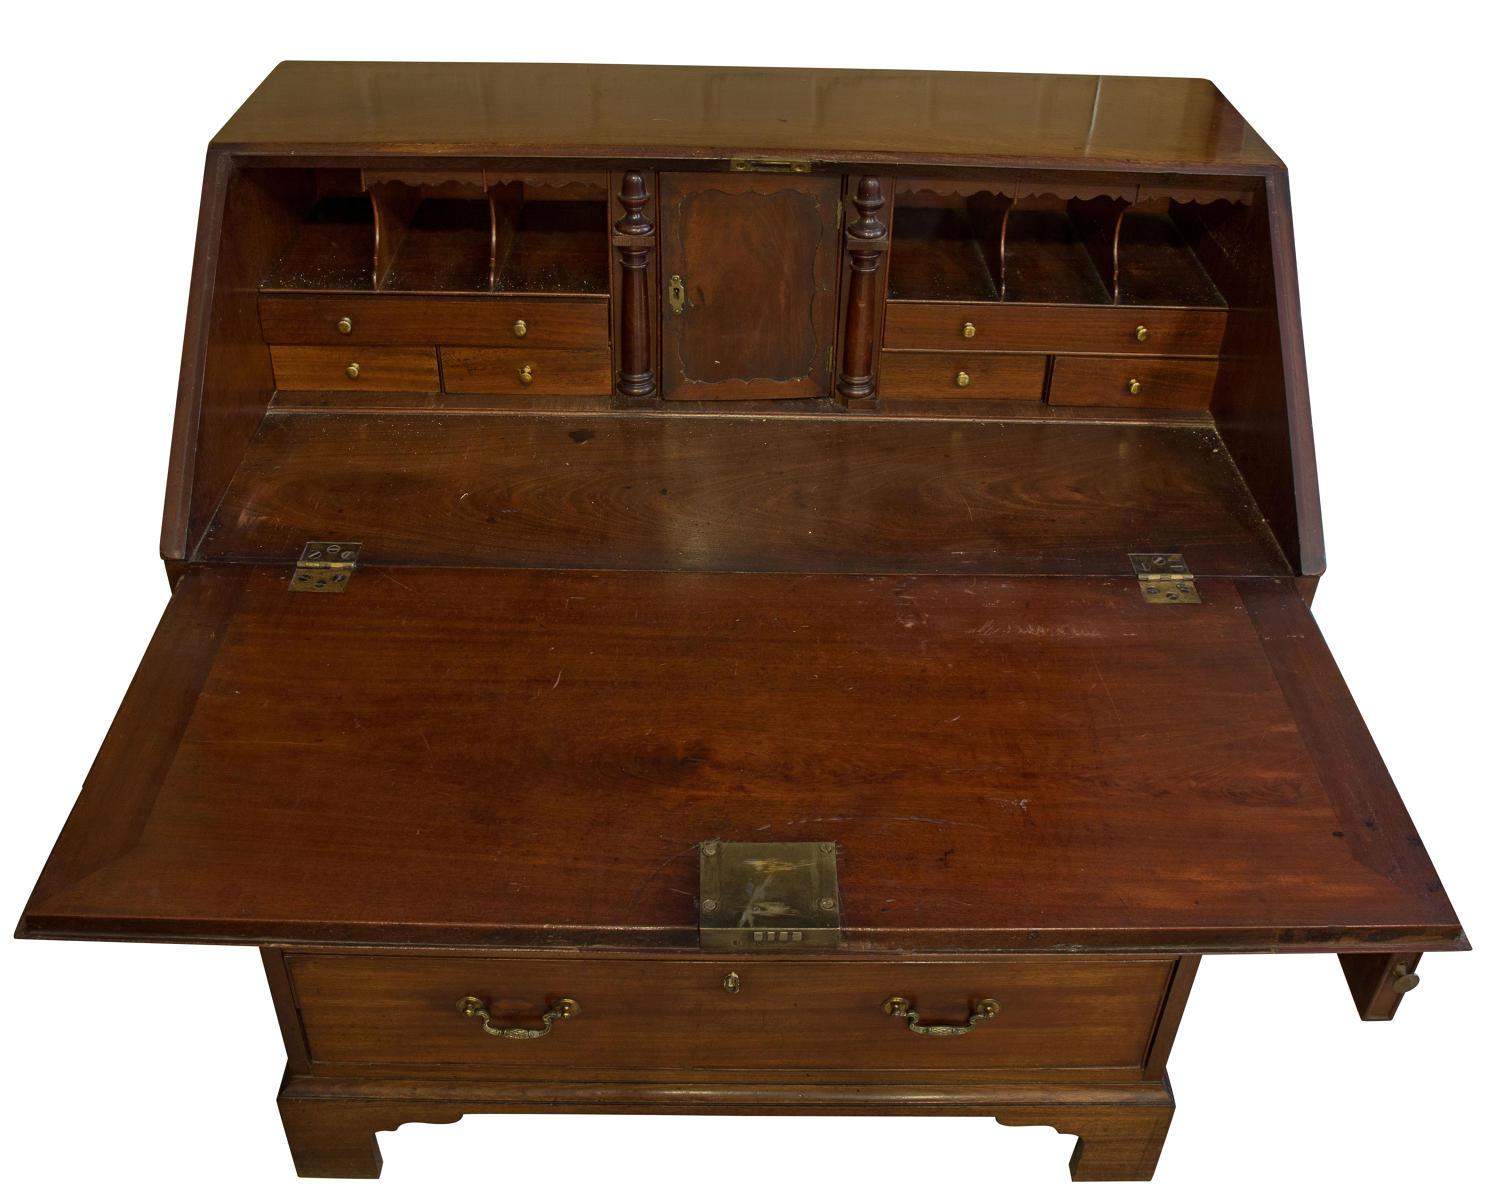 George III Mahogany 4-Drawer Bureau, Swan Neck Drop Handles Well Fitted Interior For Sale 1